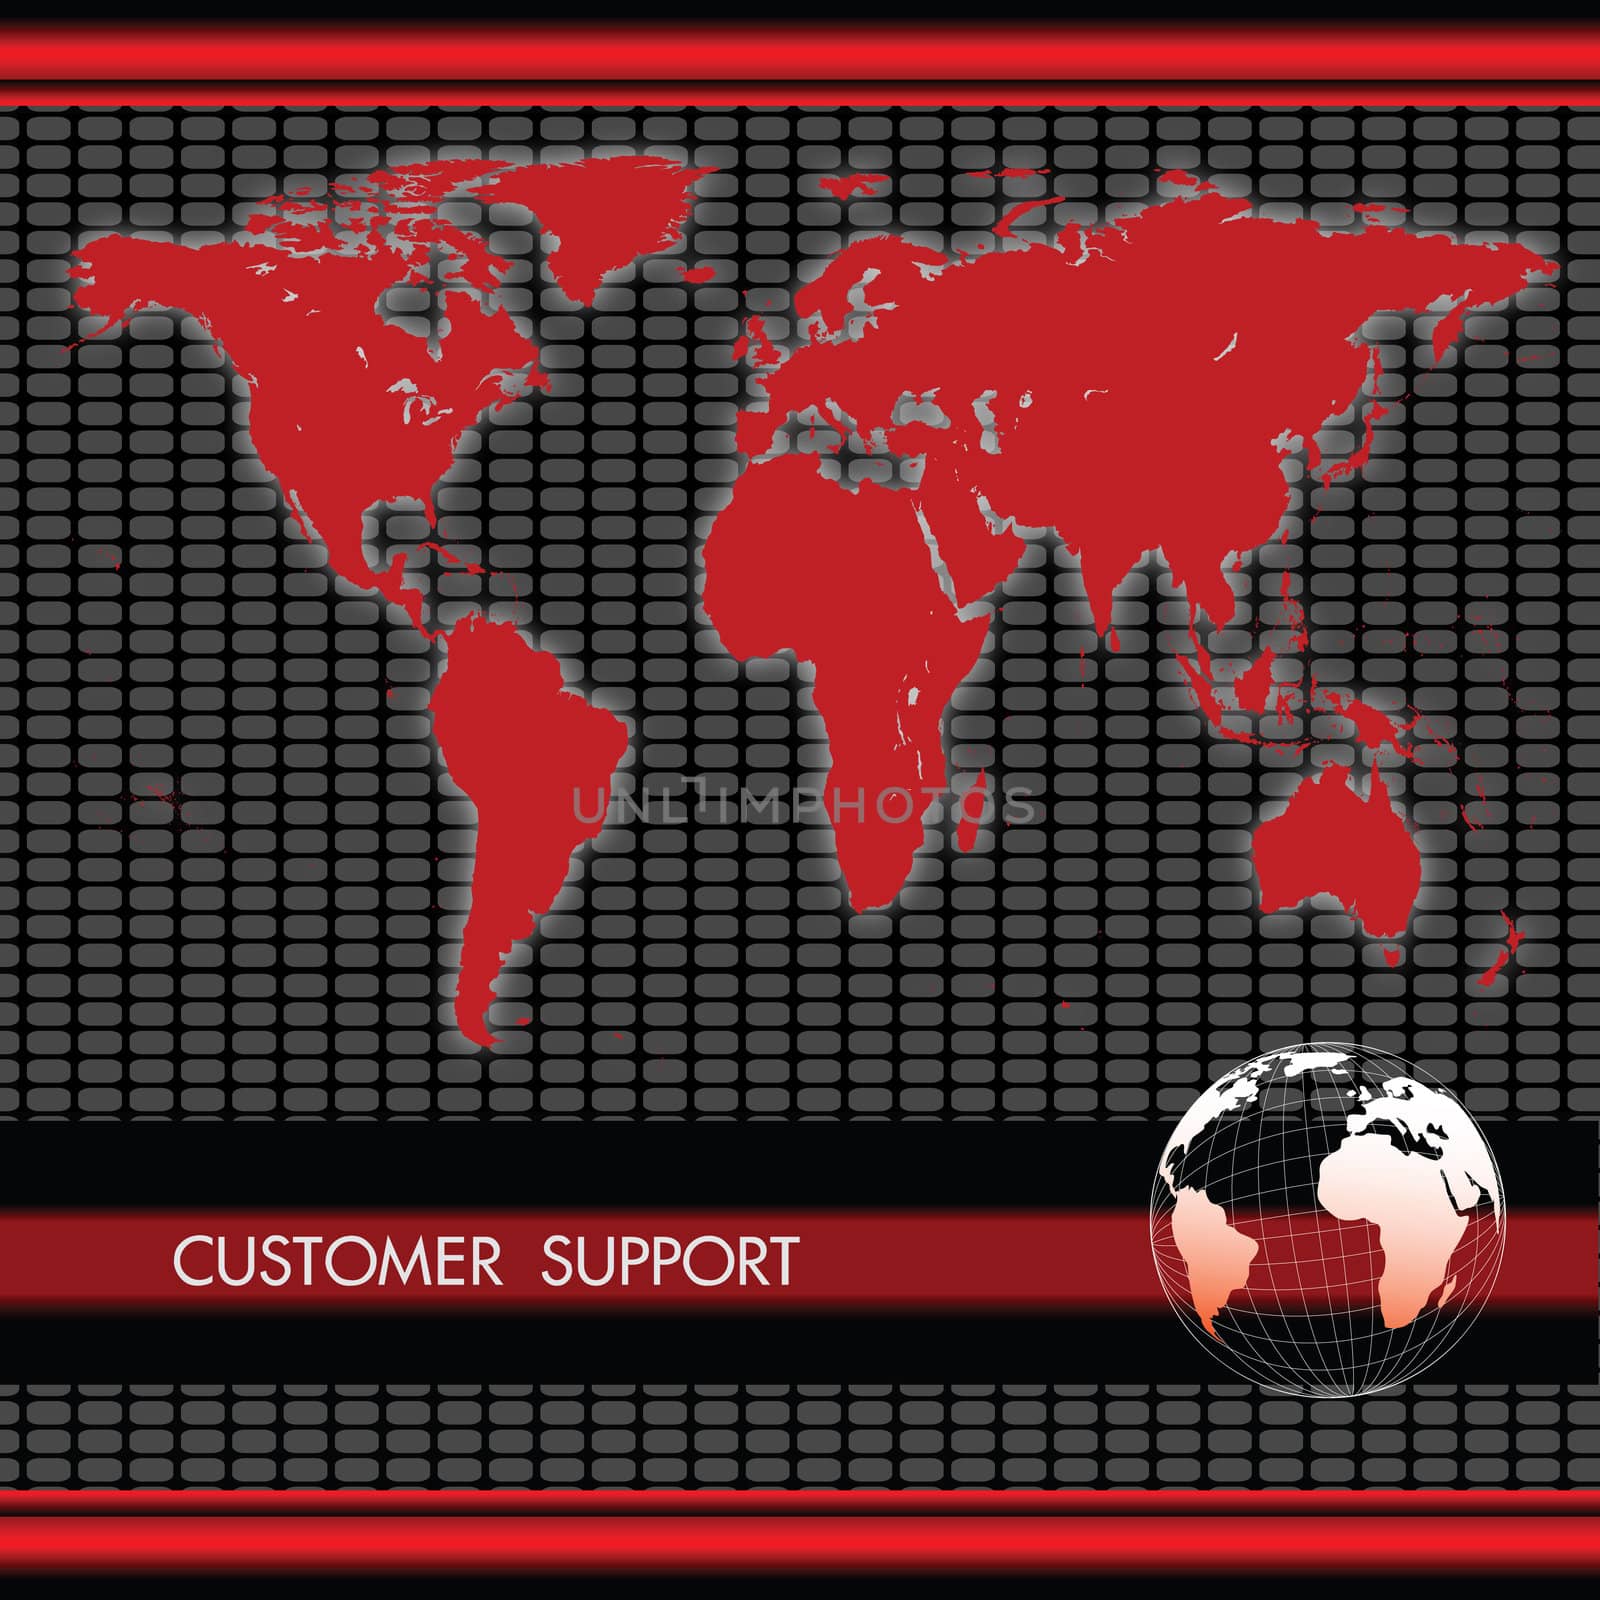 view of world map and globe with customer support
